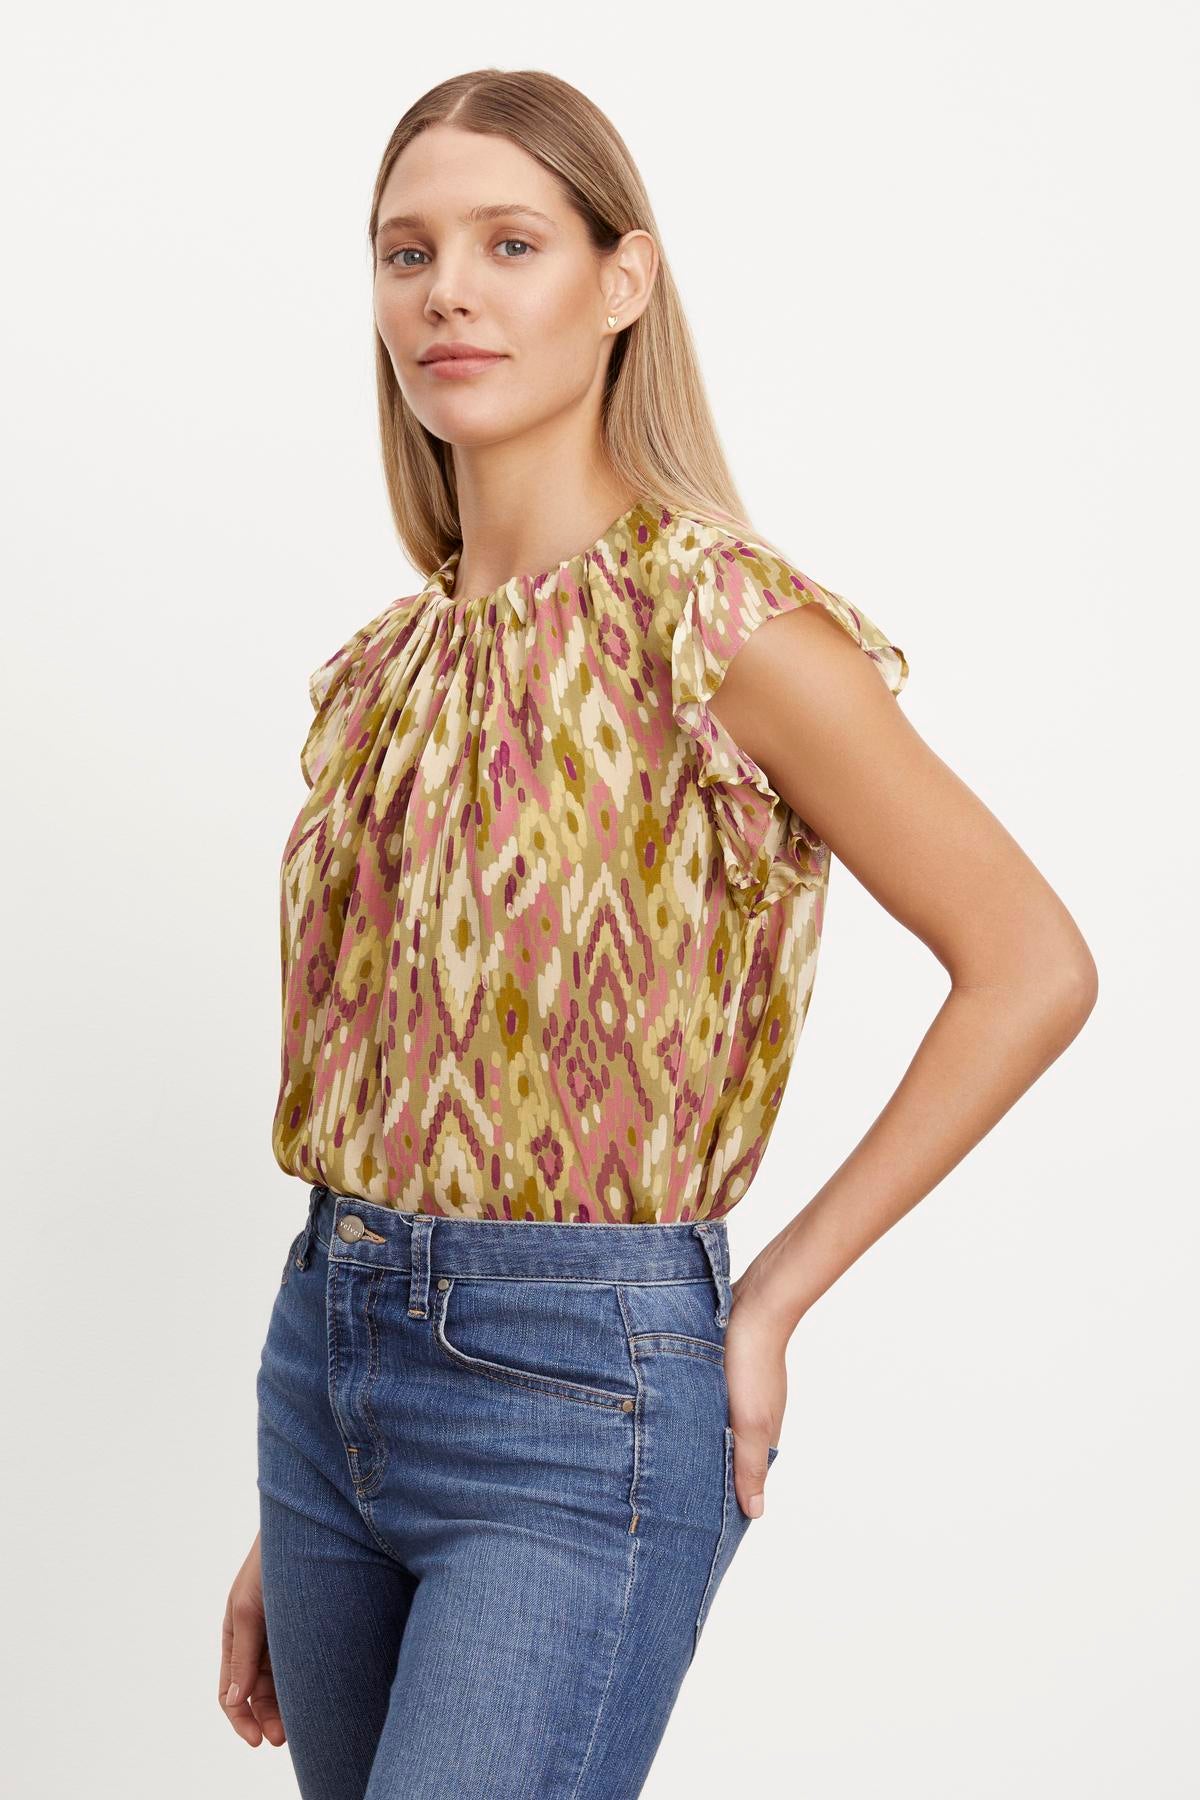 The model is wearing jeans and a Velvet by Graham & Spencer ADARA PRINTED FLUTTER SLEEVE TOP.-36094266409153